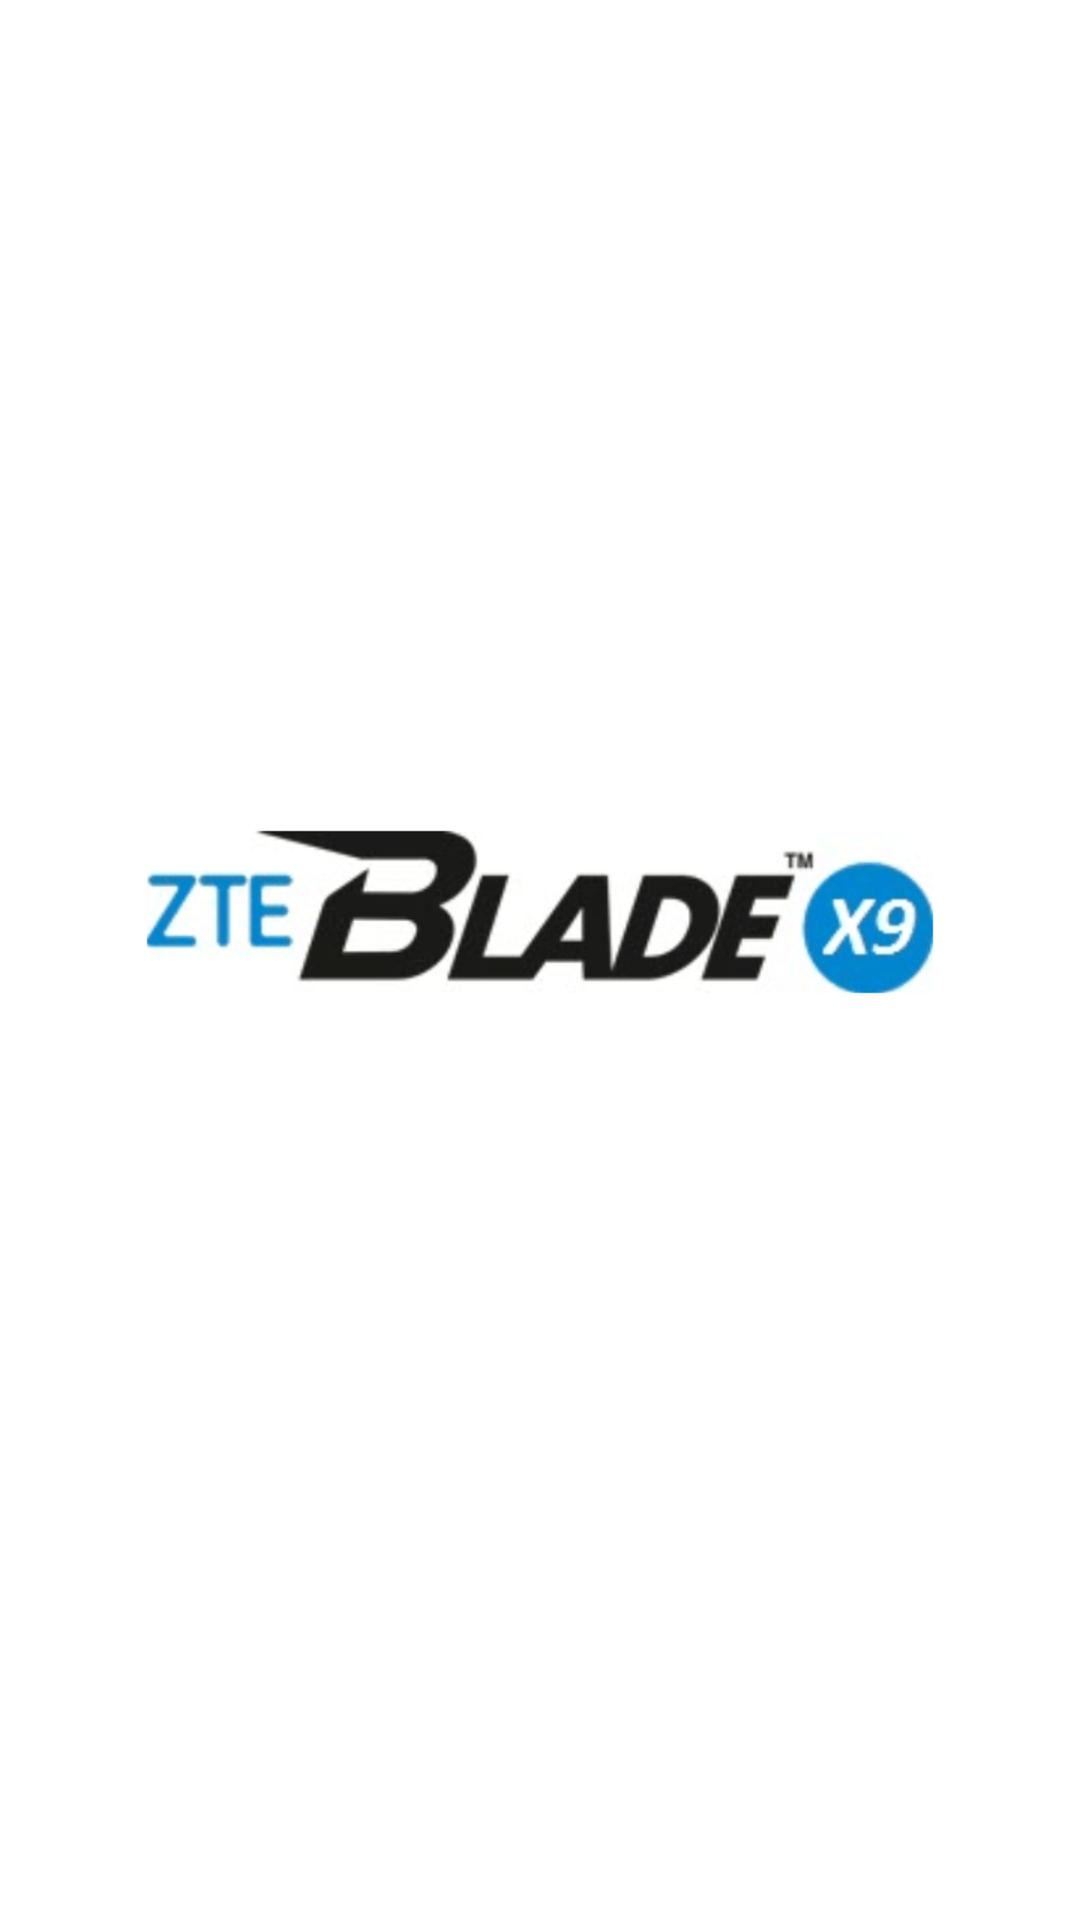 ZTE Logo - GUIDE How to Change Boot Logo Splash Scre. Android Development